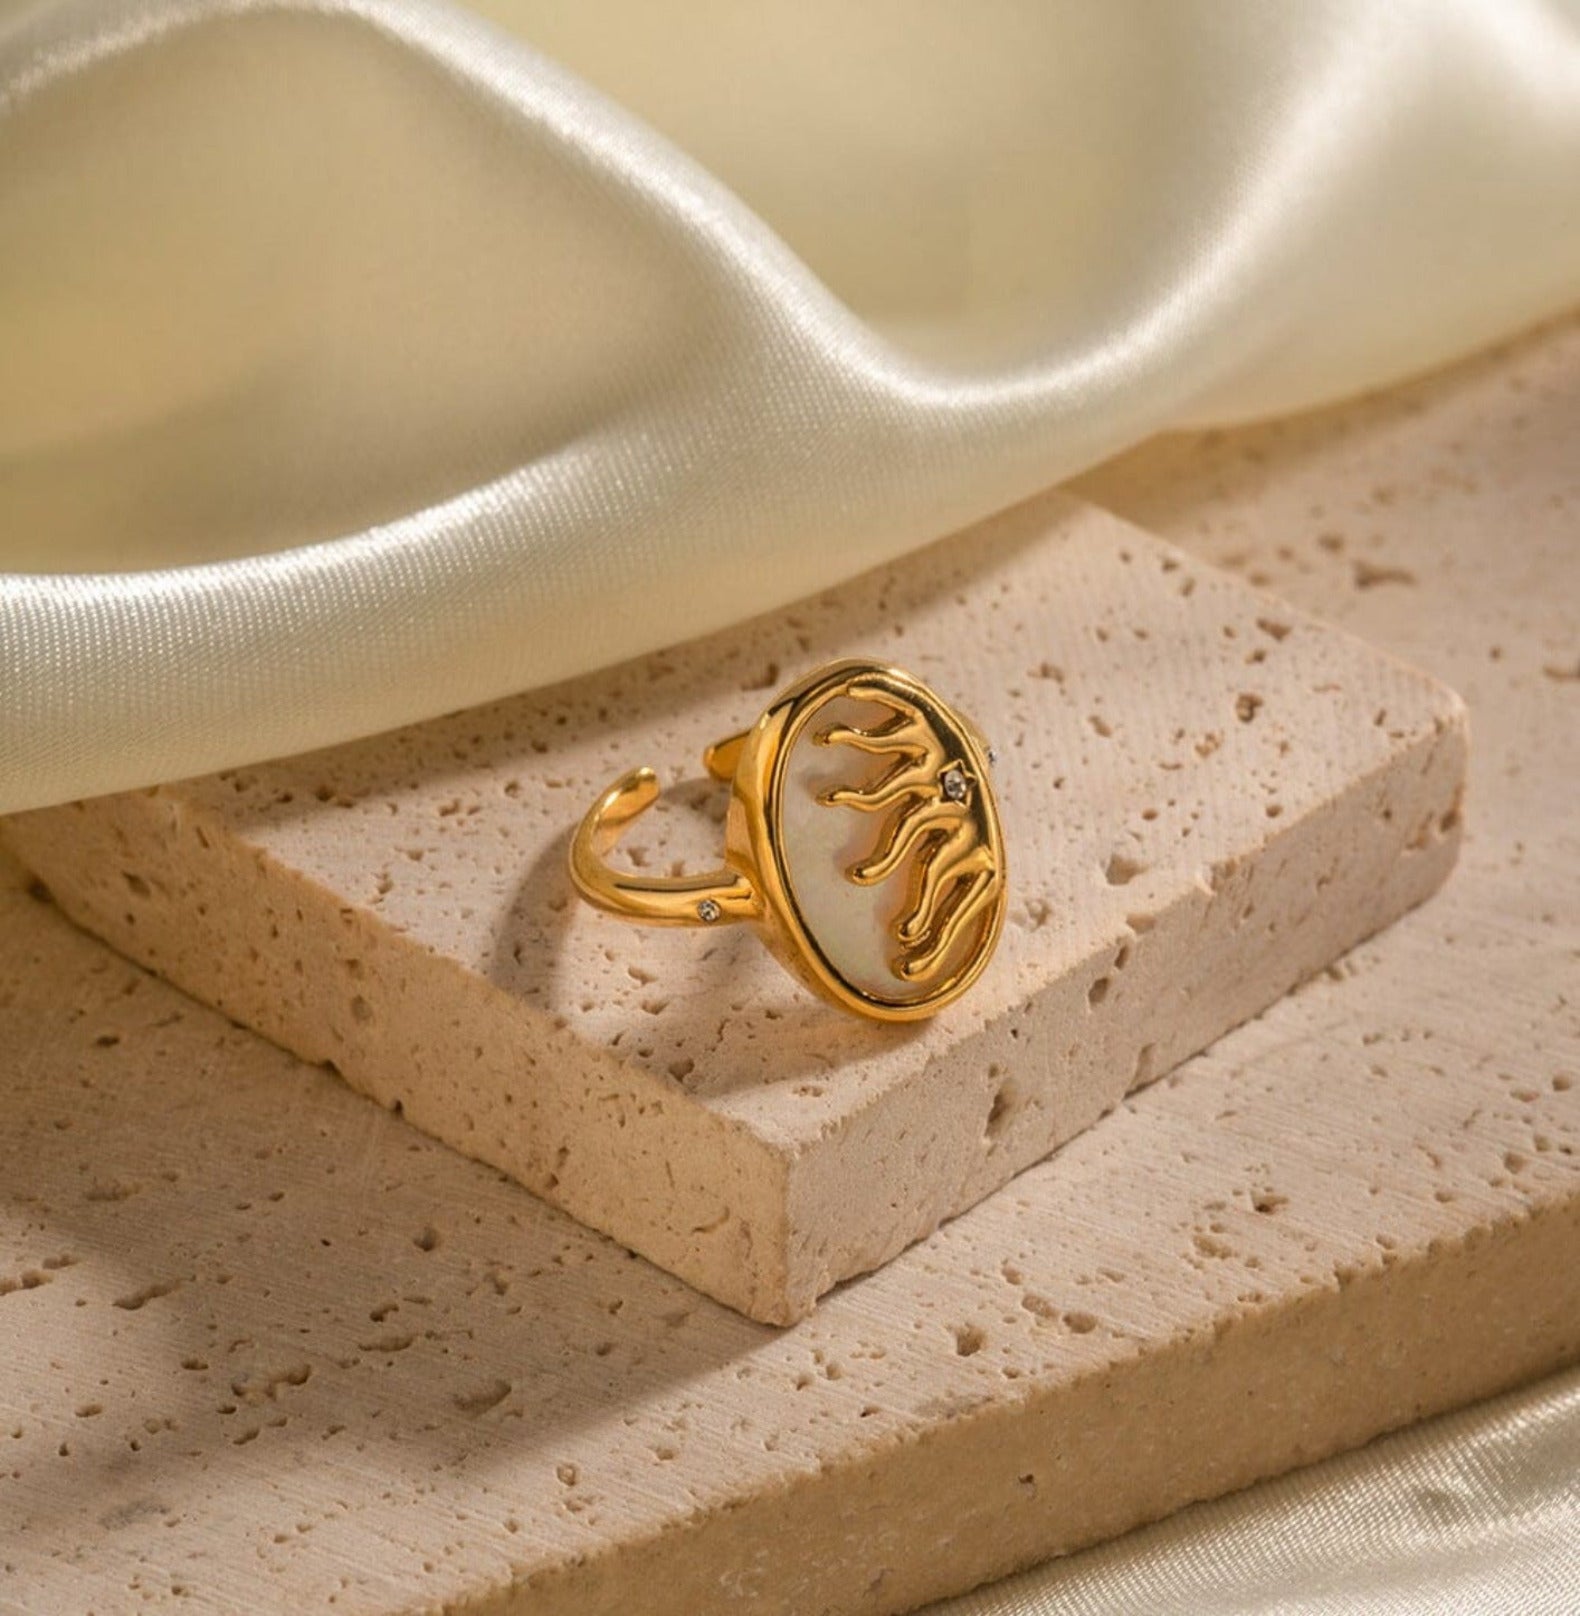 SHINNING RING ring Yubama Jewelry Online Store - The Elegant Designs of Gold and Silver ! 